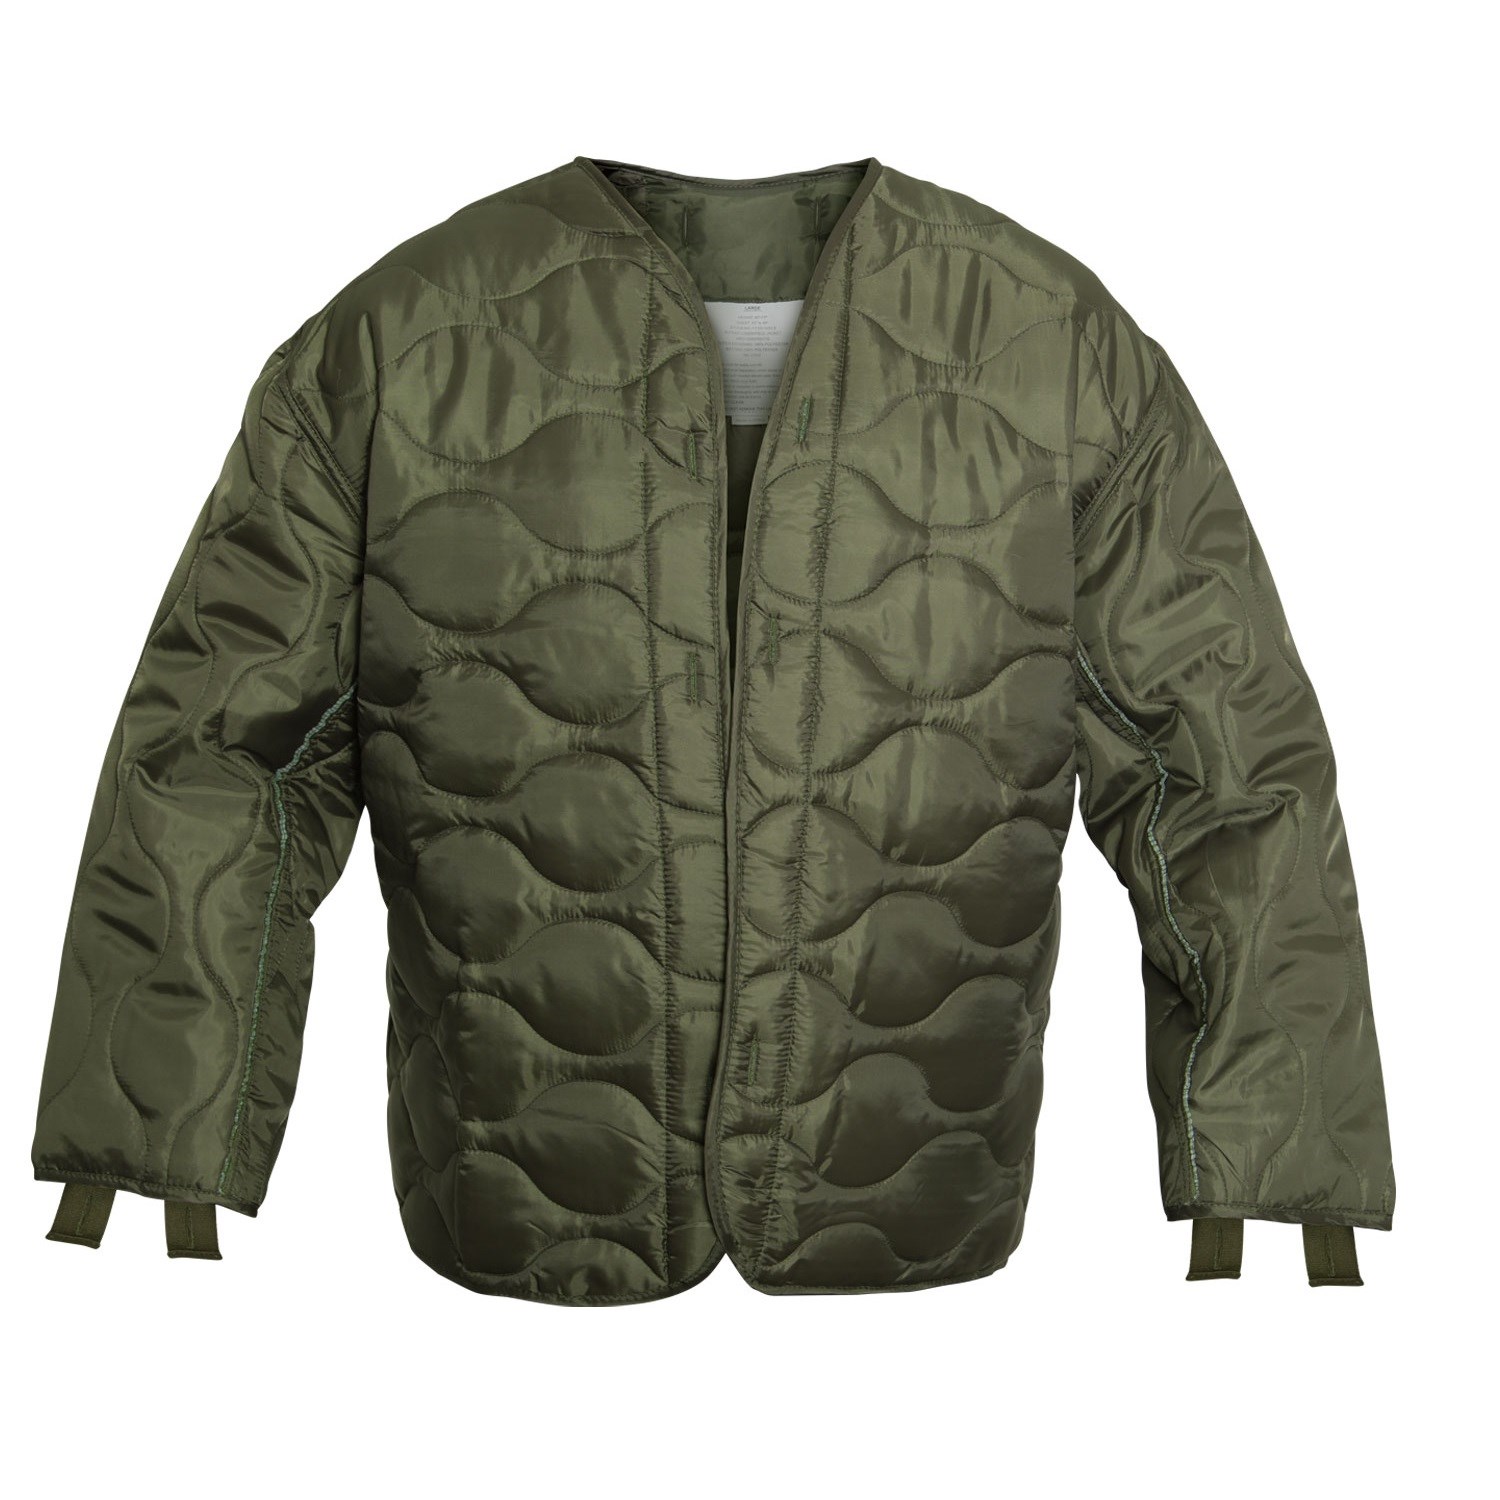 Entry into the U.S. M65 jacket OLIVE ROTHCO 8292 L-11